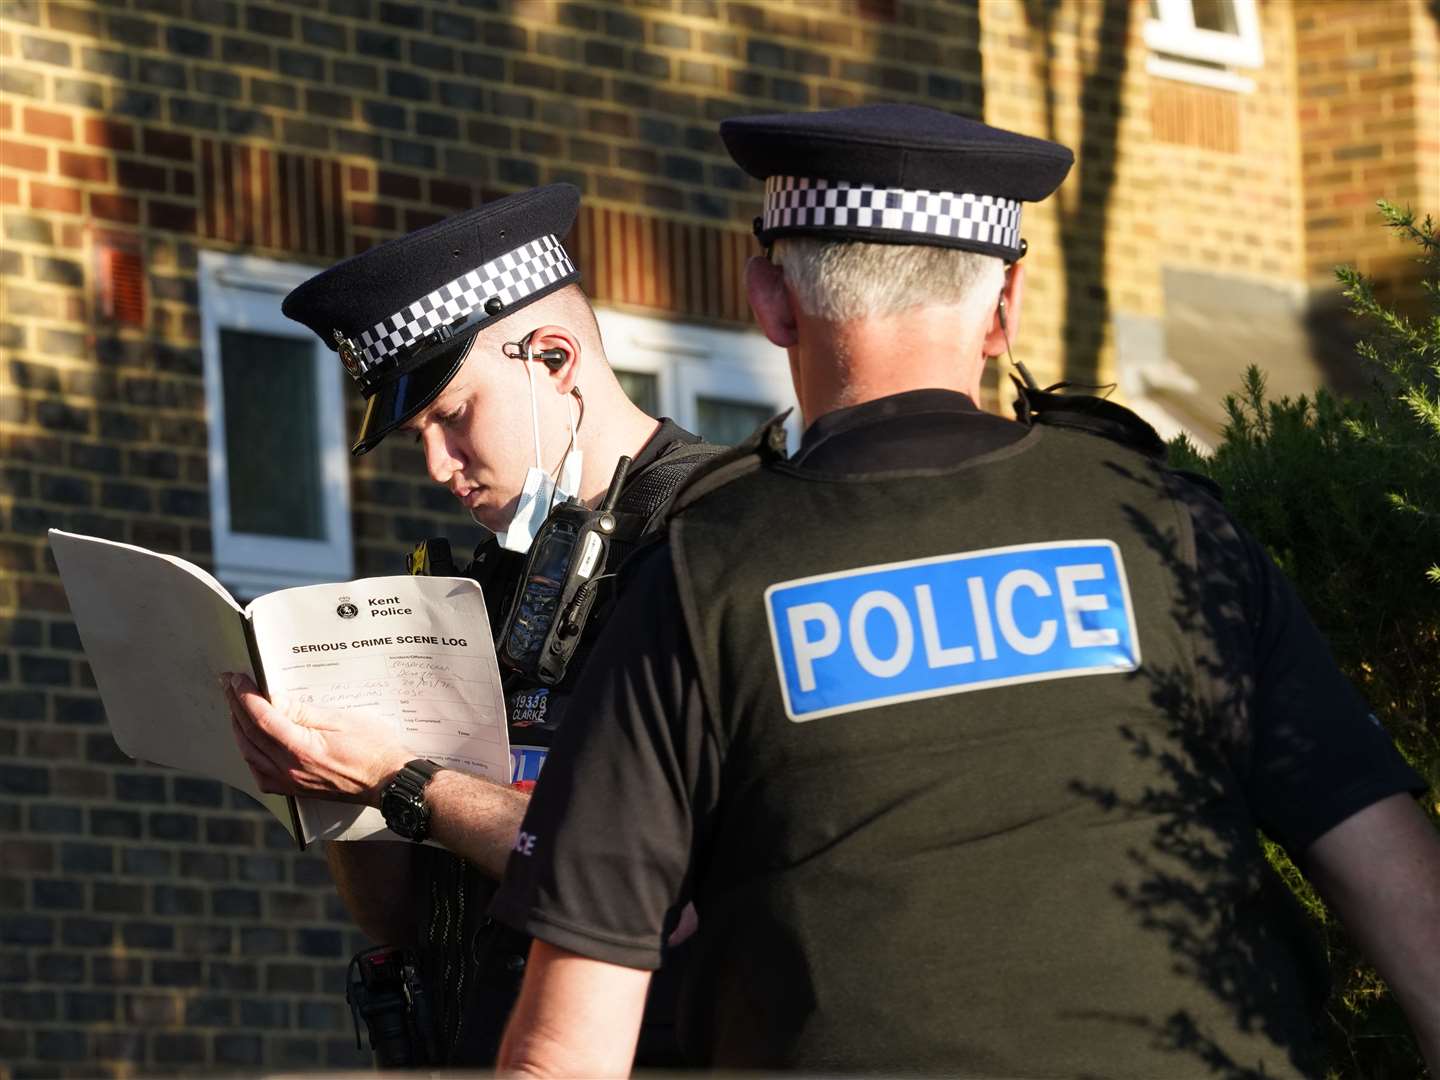 An officer fills in a 'serious crime scene log'. Picture: Andy Clark